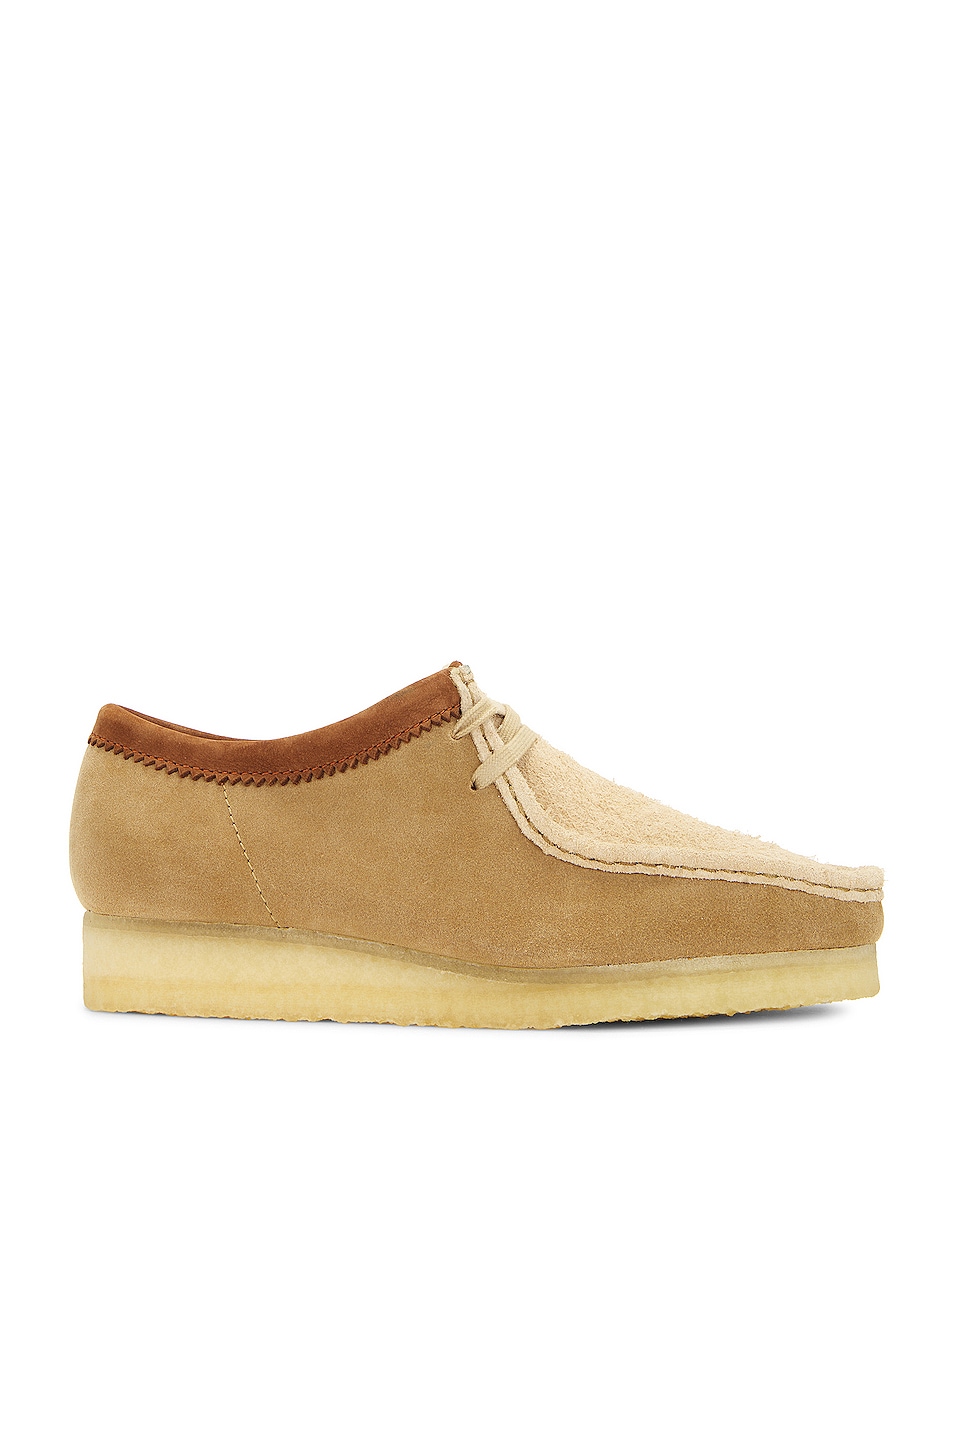 Image 1 of Clarks Wallabee in Sandstone Combination